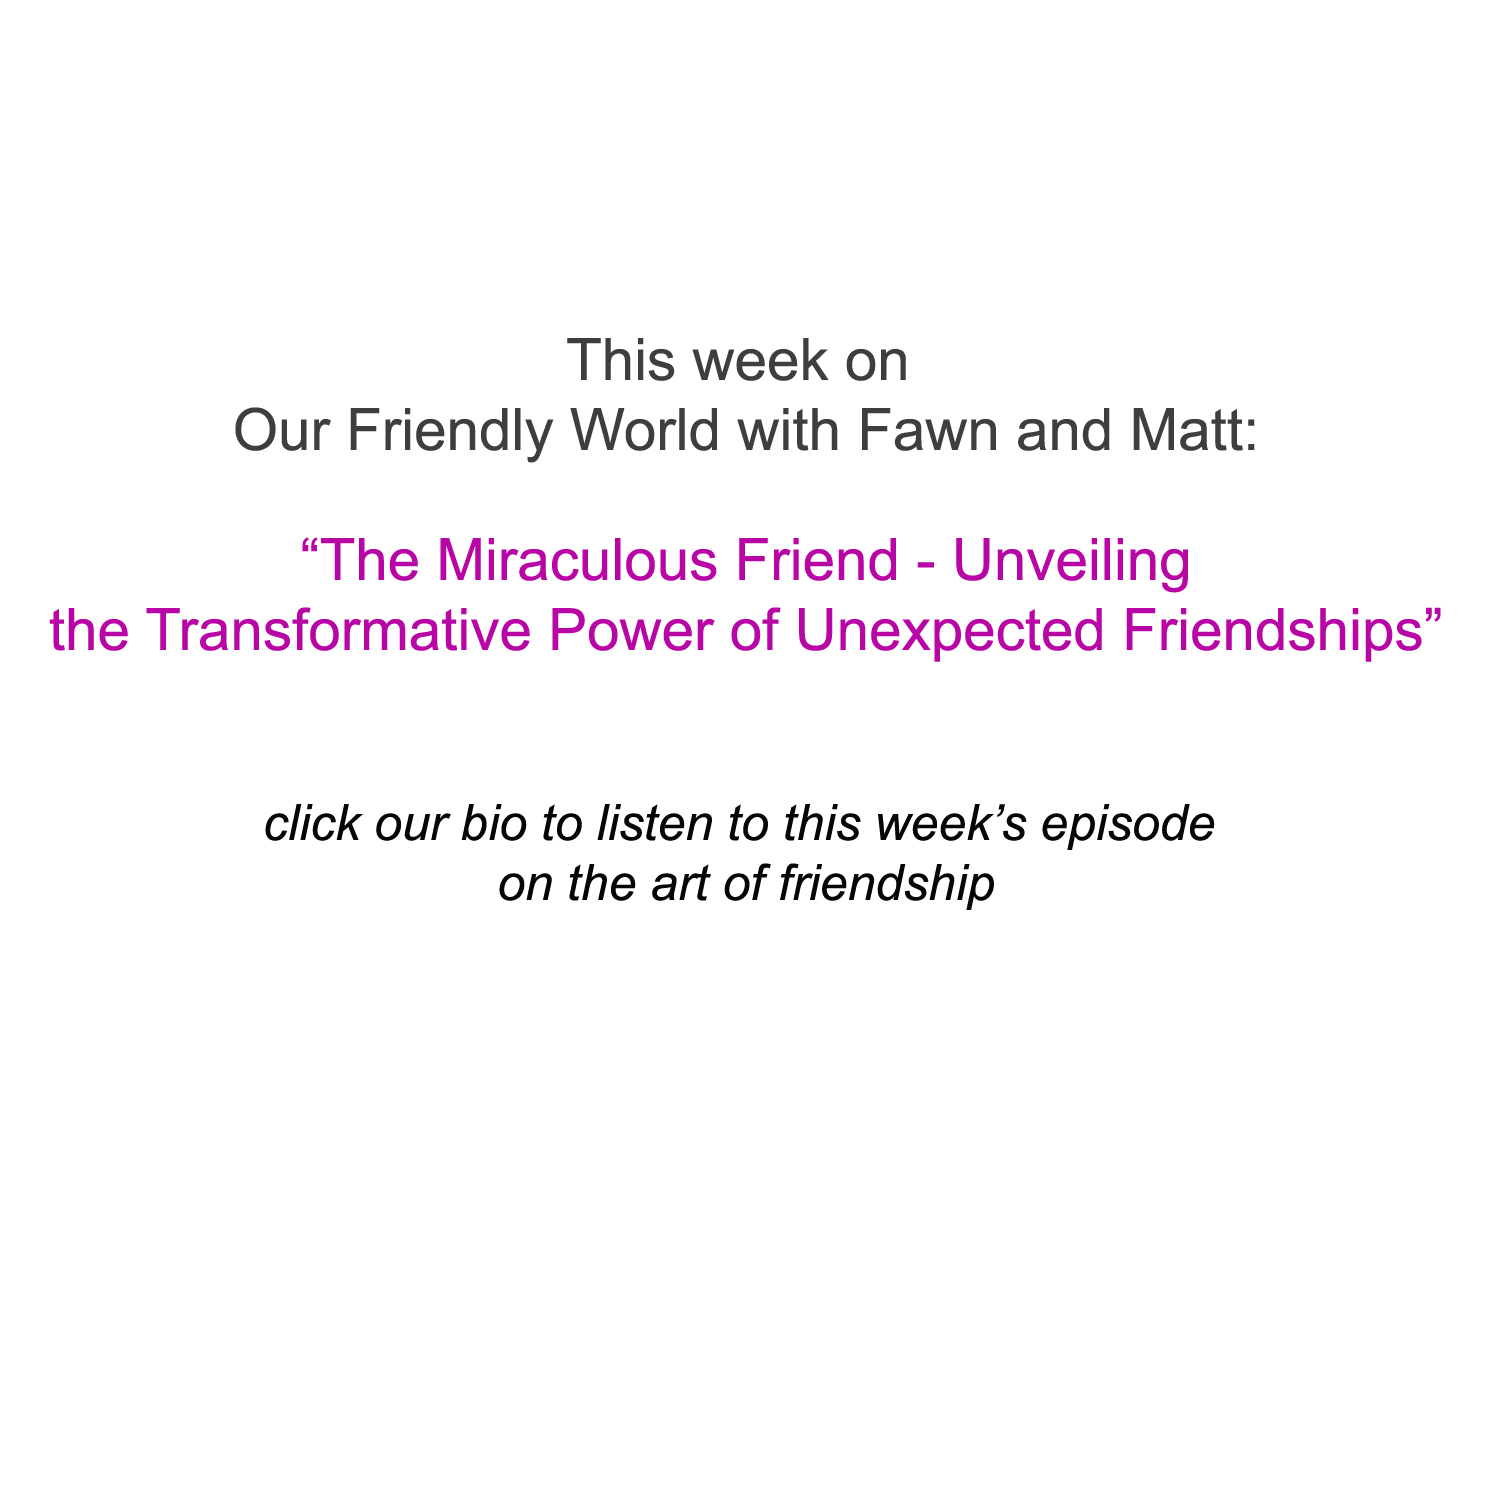 Episode image for “The Miraculous Friend – Unveiling Miracles: The Transformative Power of Unexpected Friendships